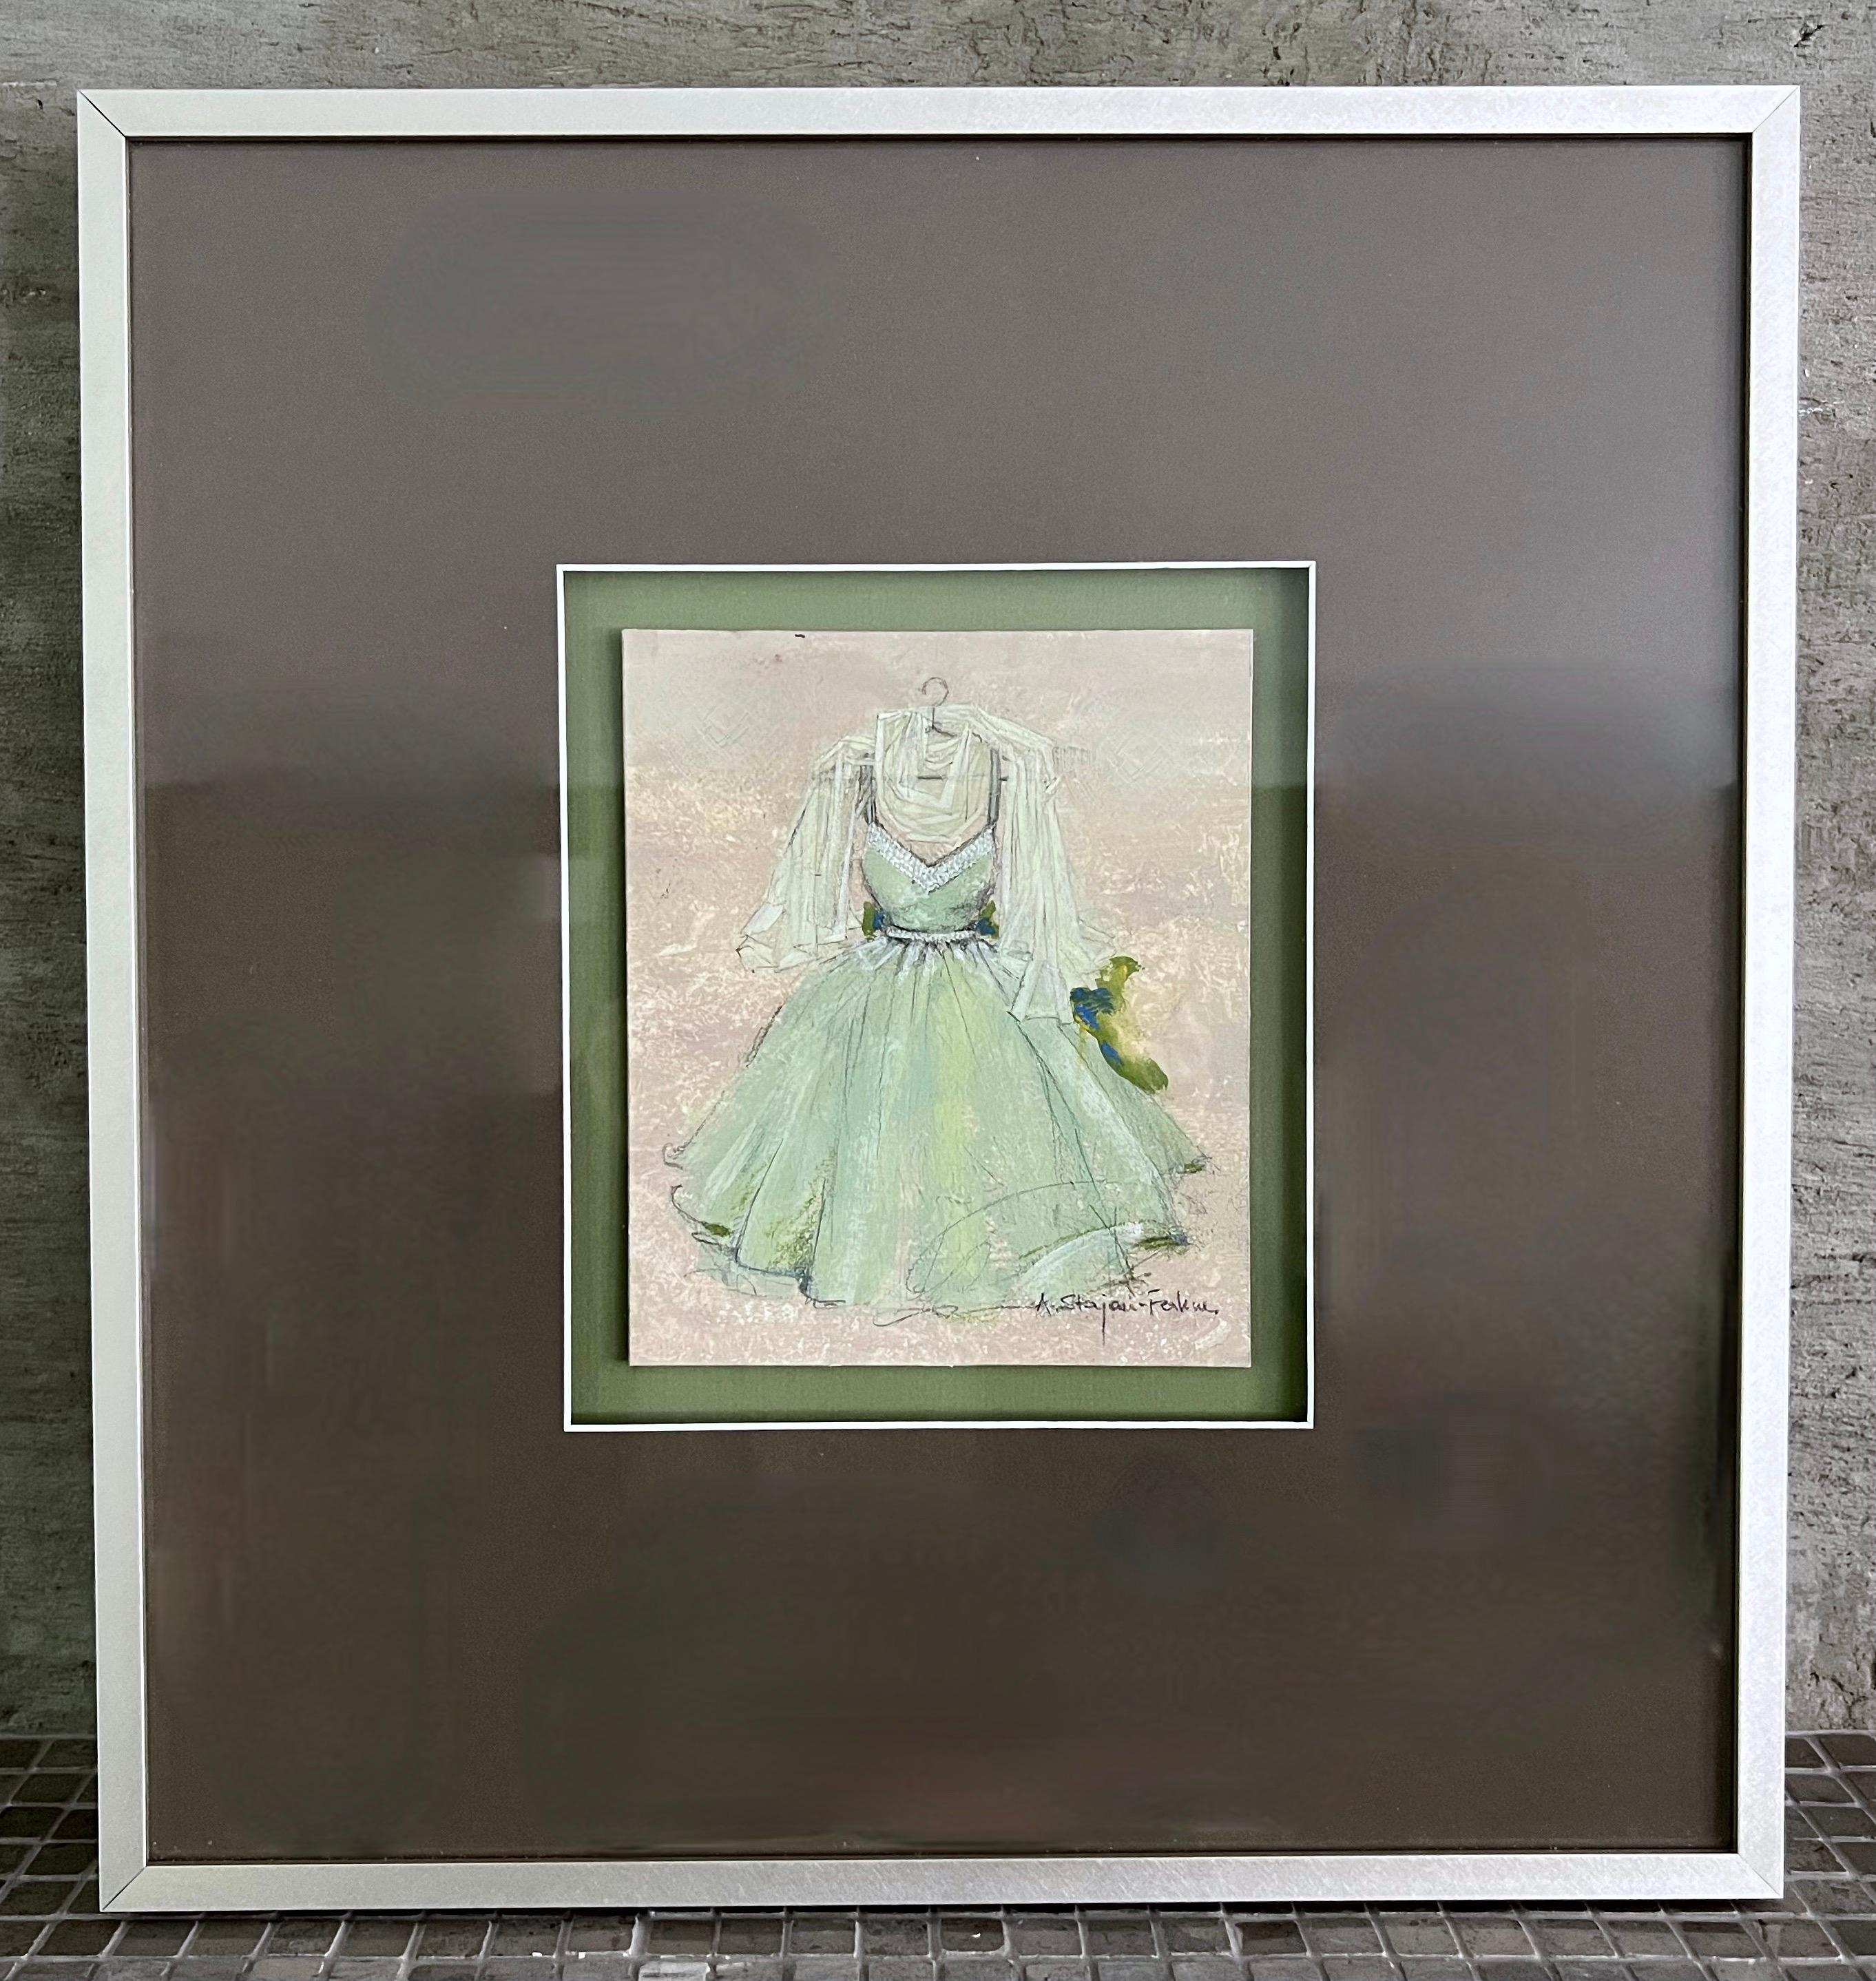 An air of femininity is expressed in this chiffon style dress painting on art board, a nostalgic nod to the graduation, prom or bridesmaid dress. Delicate detail builds up a soft texture over translucent layers of pastel green. The combination of